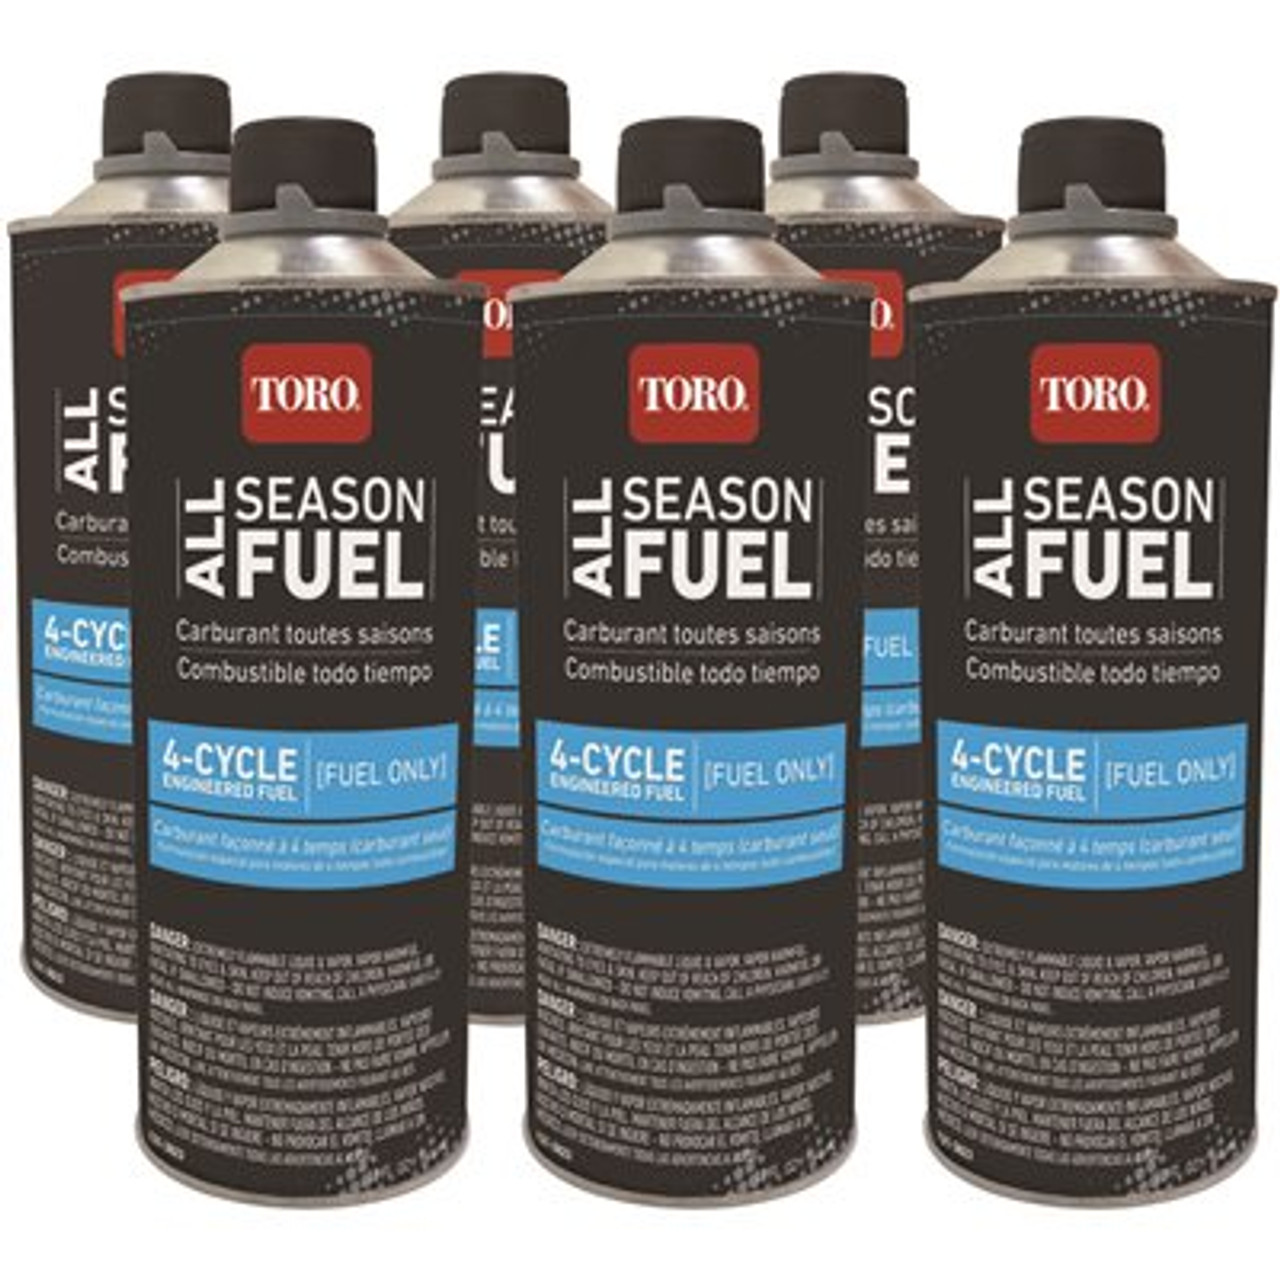 Toro 32 oz. All Season 4-Cycle Fuel for Lawn Mowers and Snow Blowers (6-Pack)